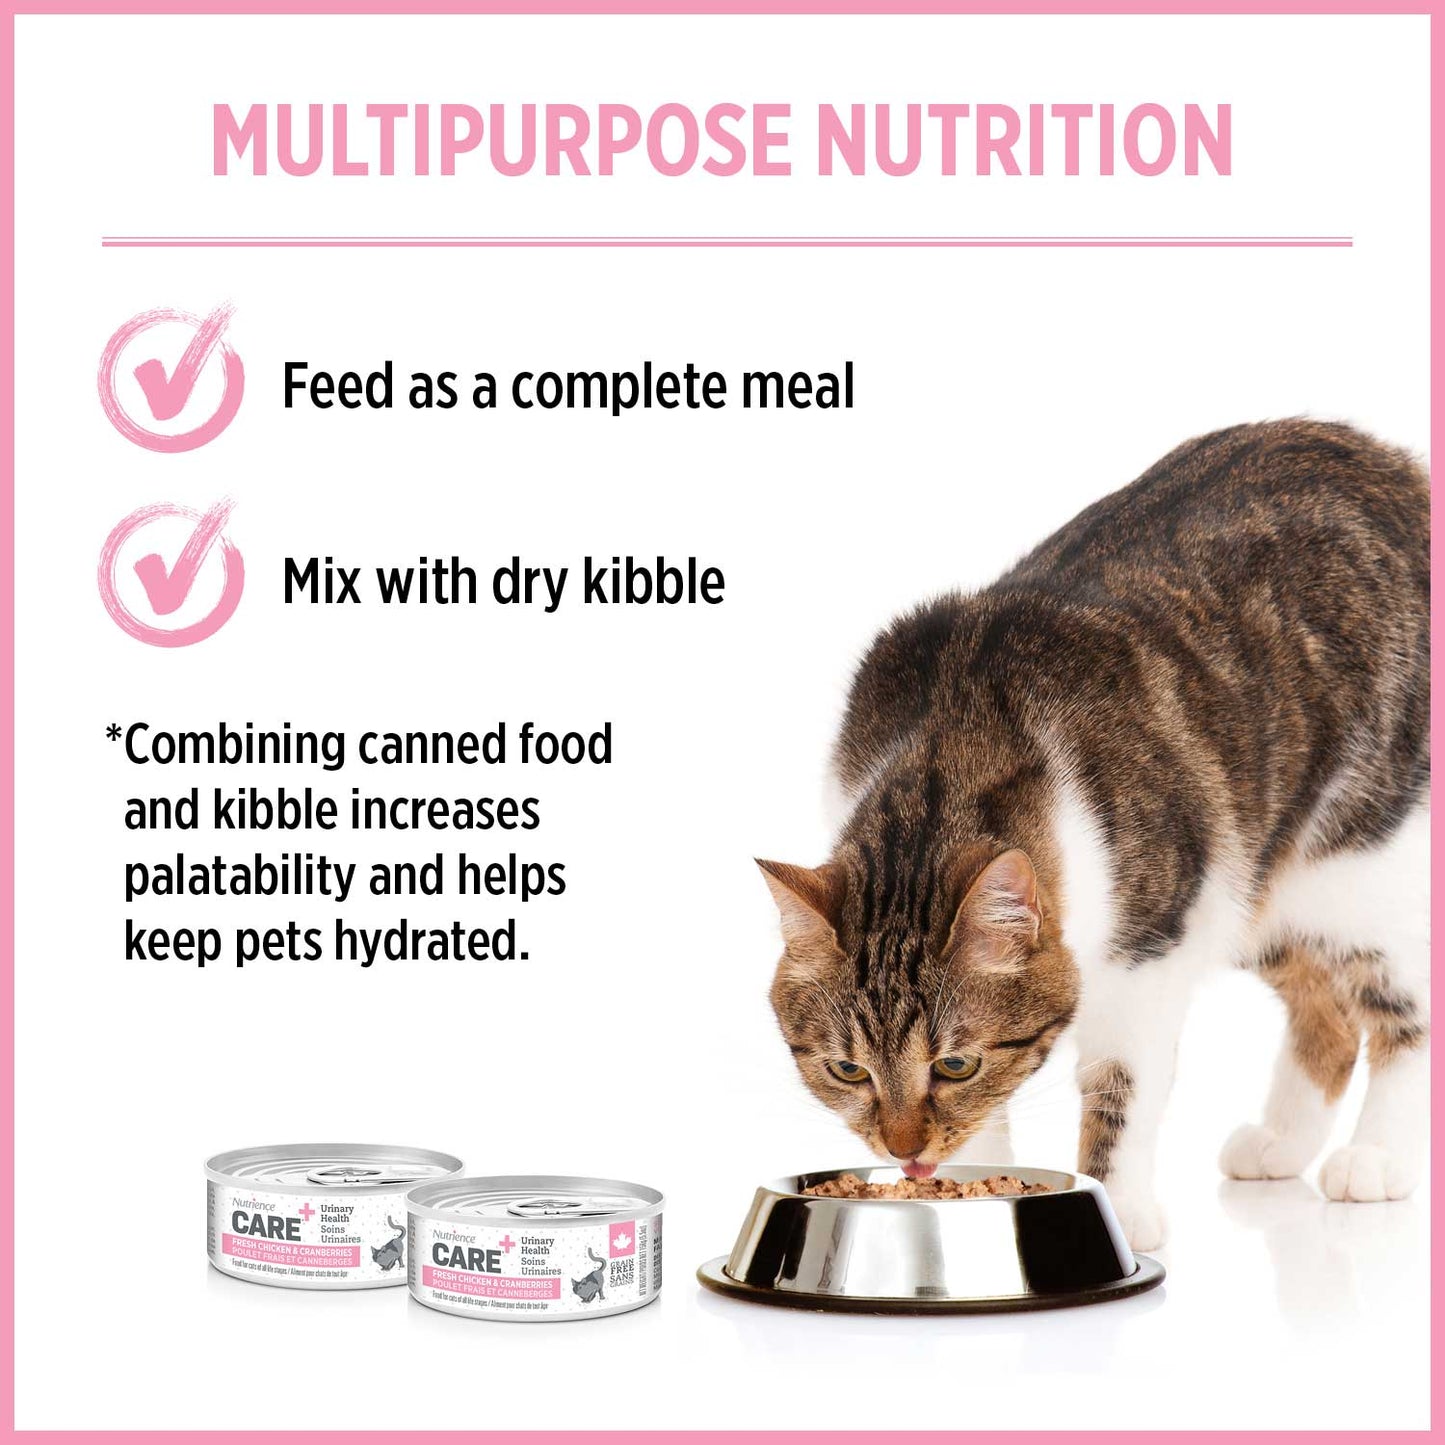 Nutrience Care Canned Cat Food Urinary Health  Canned Cat Food  | PetMax Canada